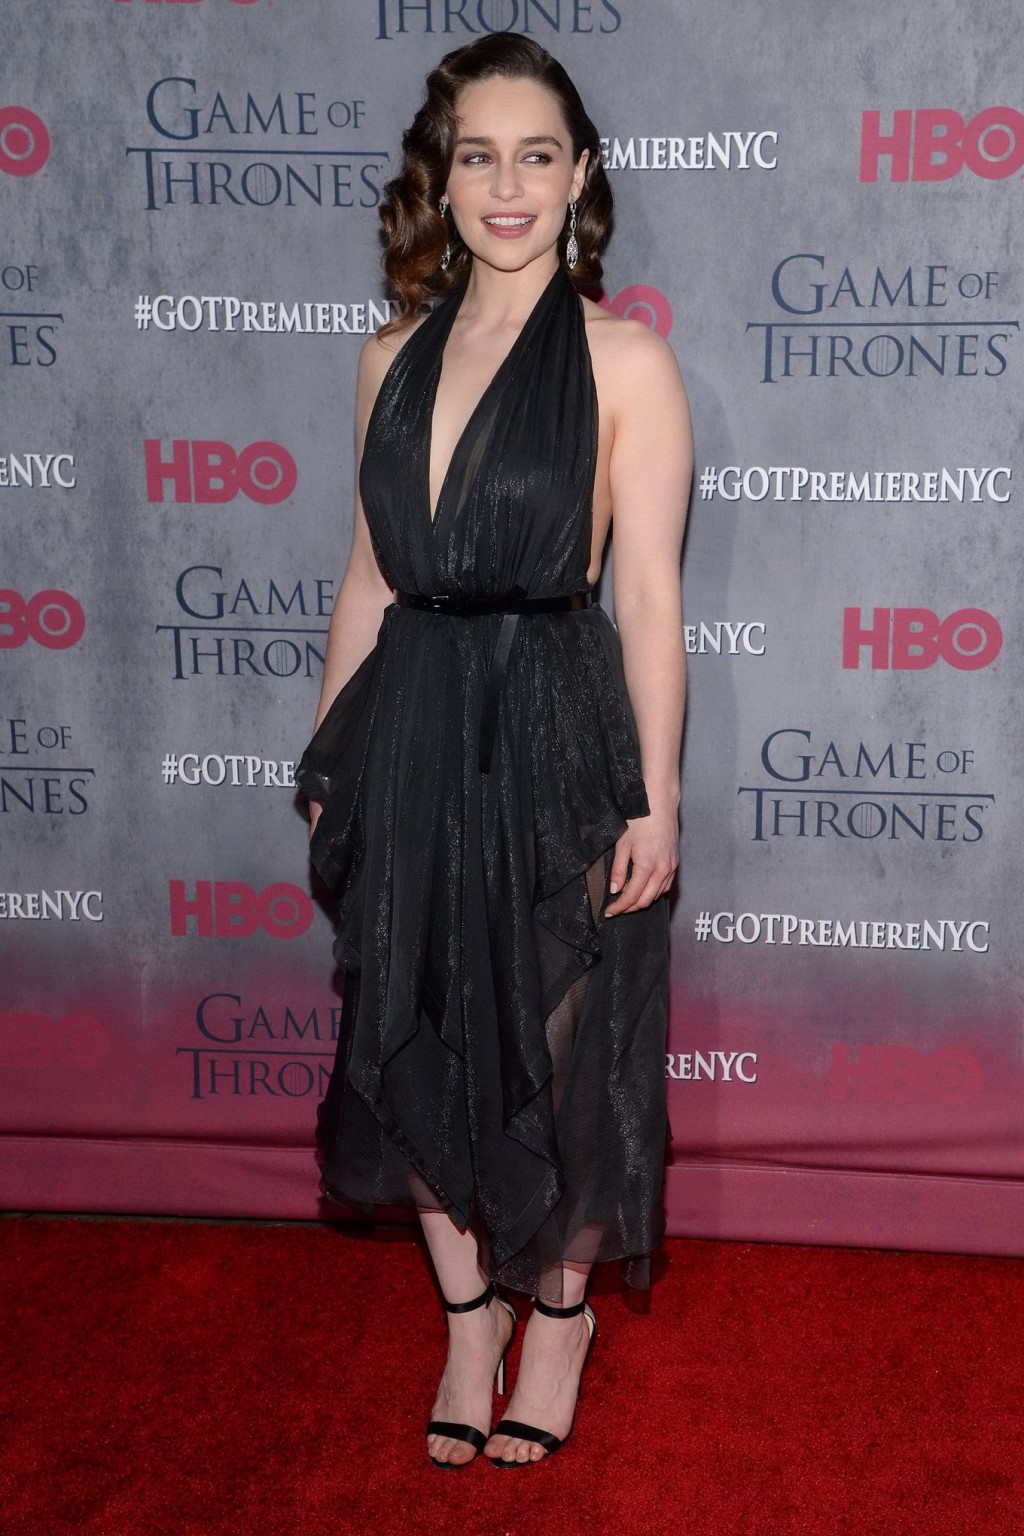 Emilia Clarke braless wearing black partially see-through dress at the Game of T #75201480